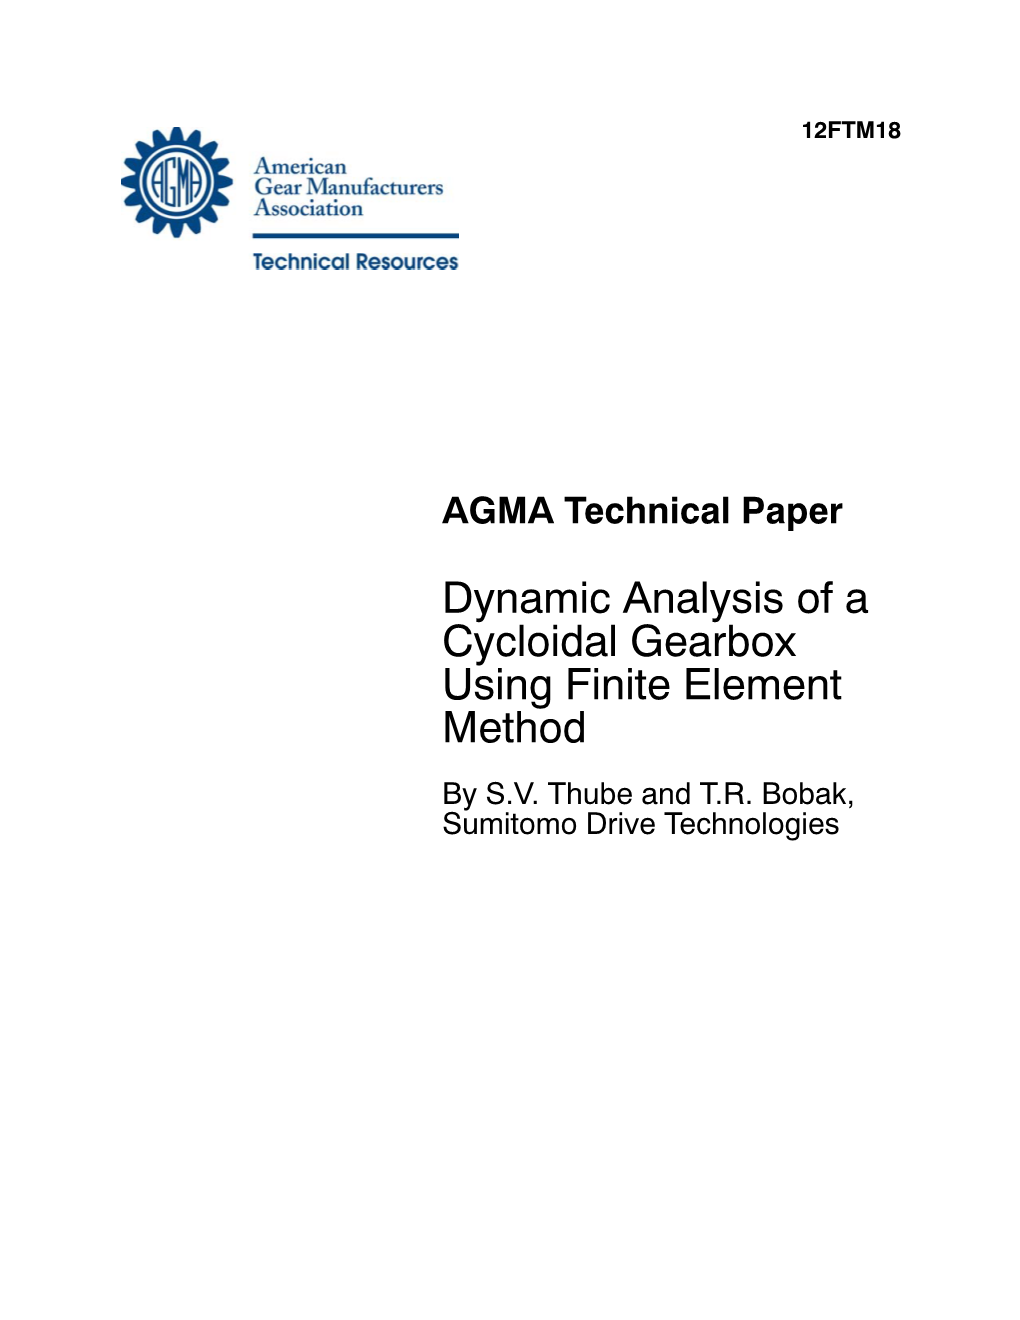 Dynamic Analysis of a Cycloidal Gearbox Using Finite Element Method by S.V